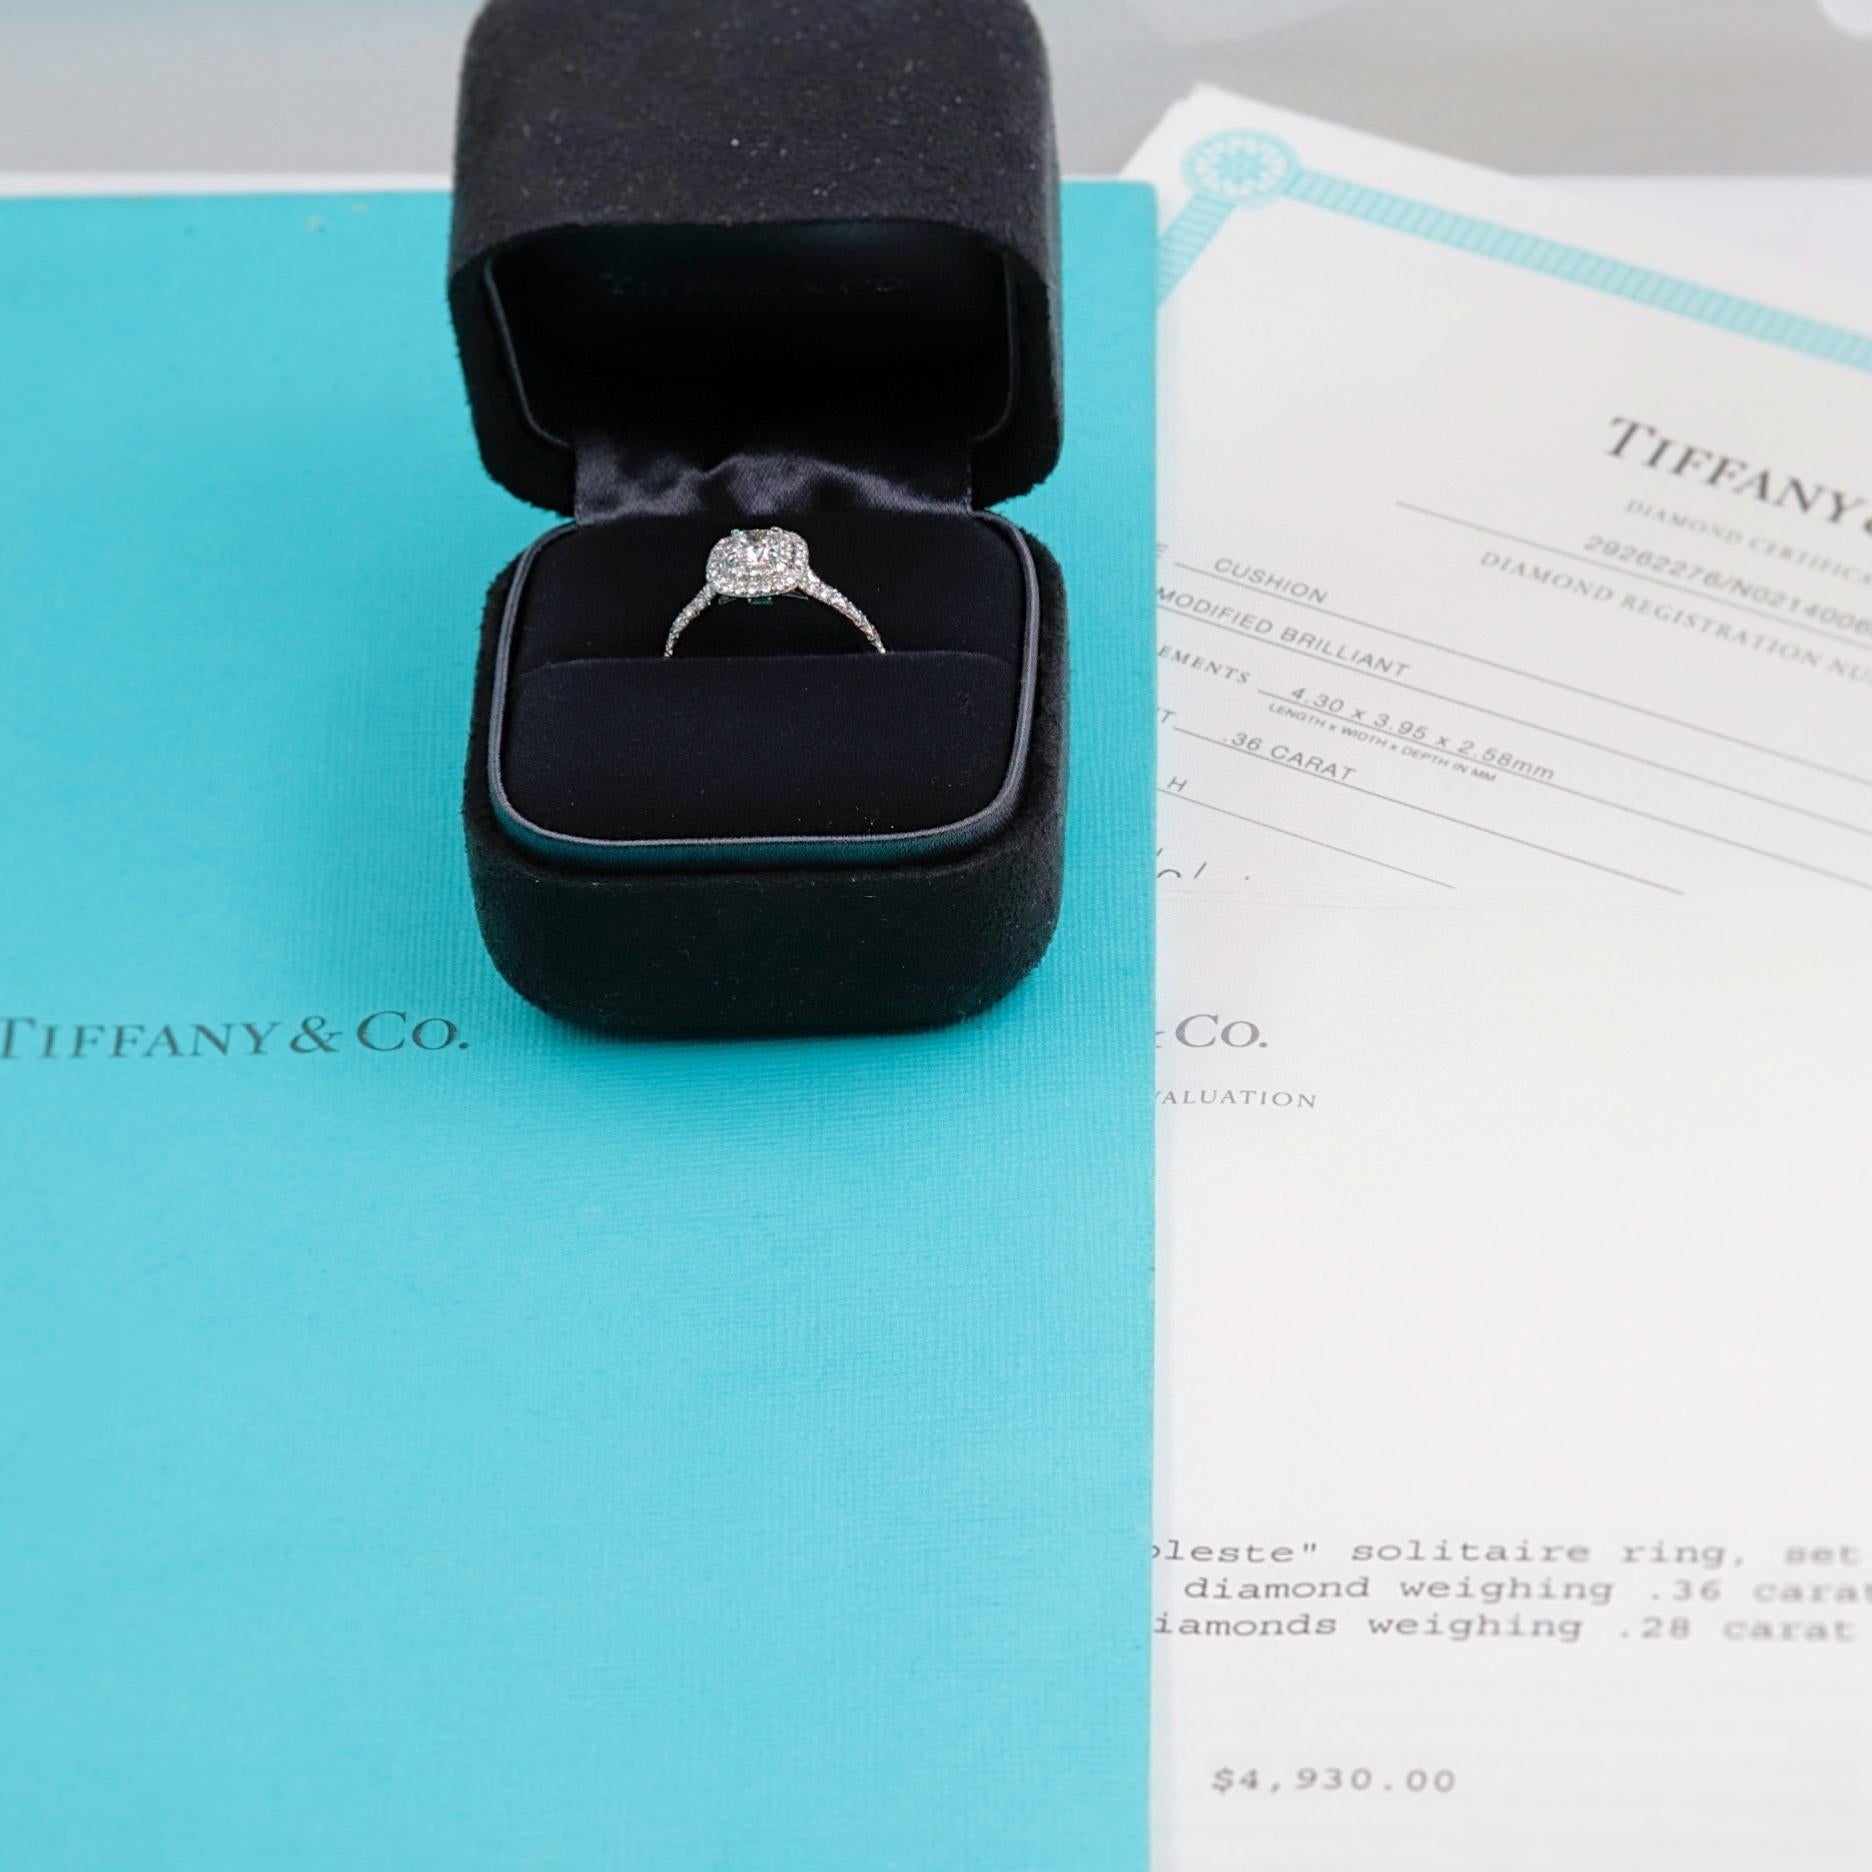 Tiffany & Co.

Style:  Soleste Diamond Engagement Ring
Serial Number:  29262276 / N02140060
Metal:  Platinum PT950
Size:  6 - sizable
Total Carat Weight:  0.64 tcw
Diamond Shape:  Round Brilliant 0.36 cts
Diamond Color & Clarity:  H - VS1
Crown